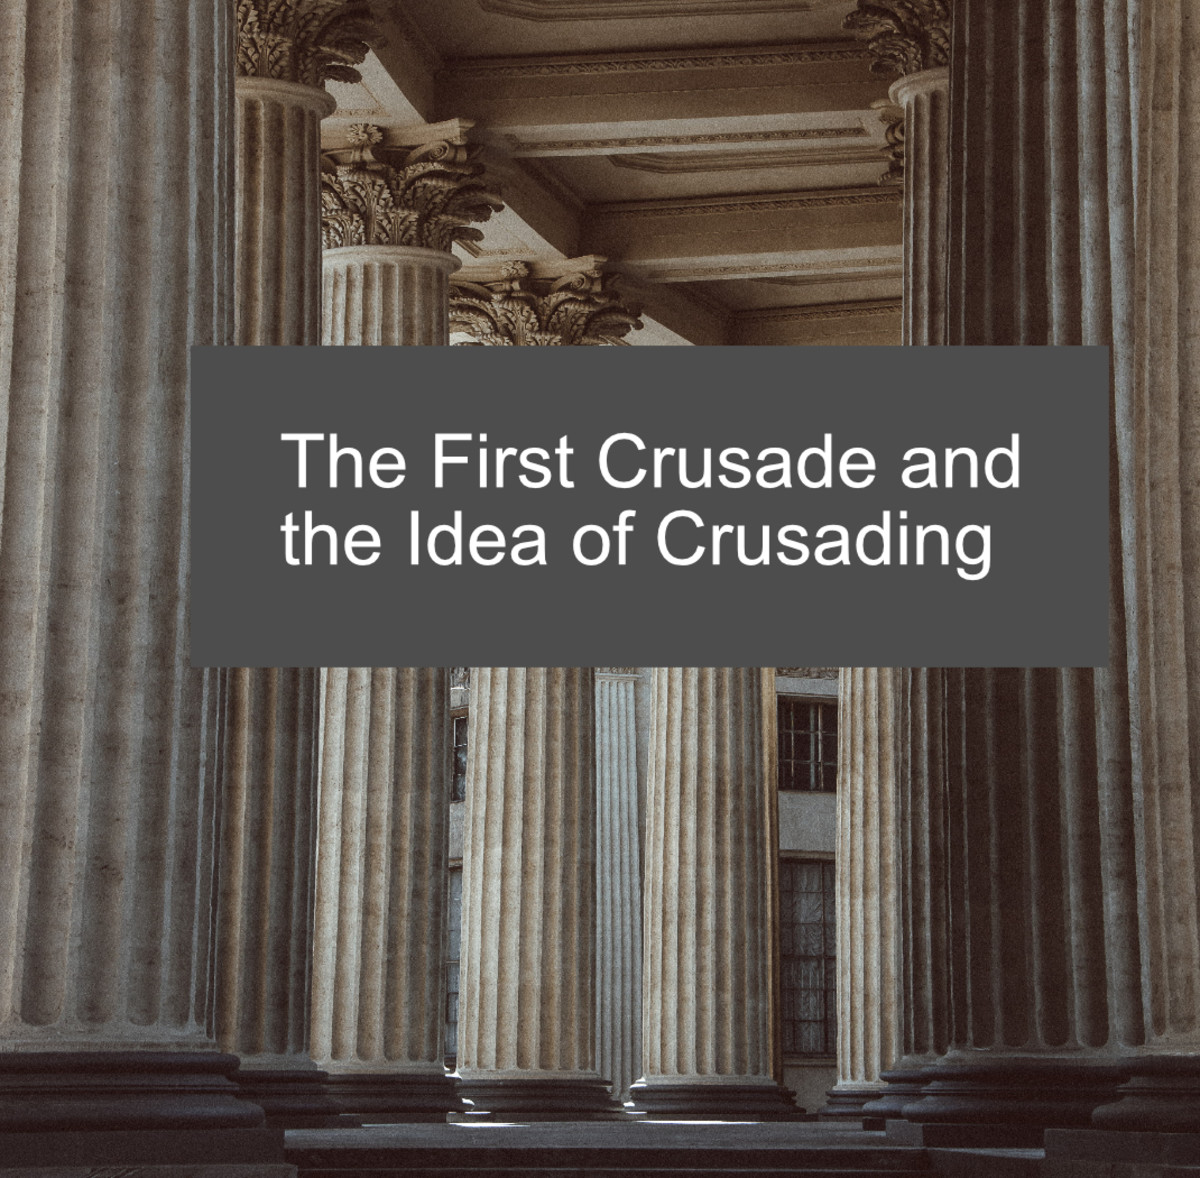 The First Crusade and the Idea of Crusading, a Review